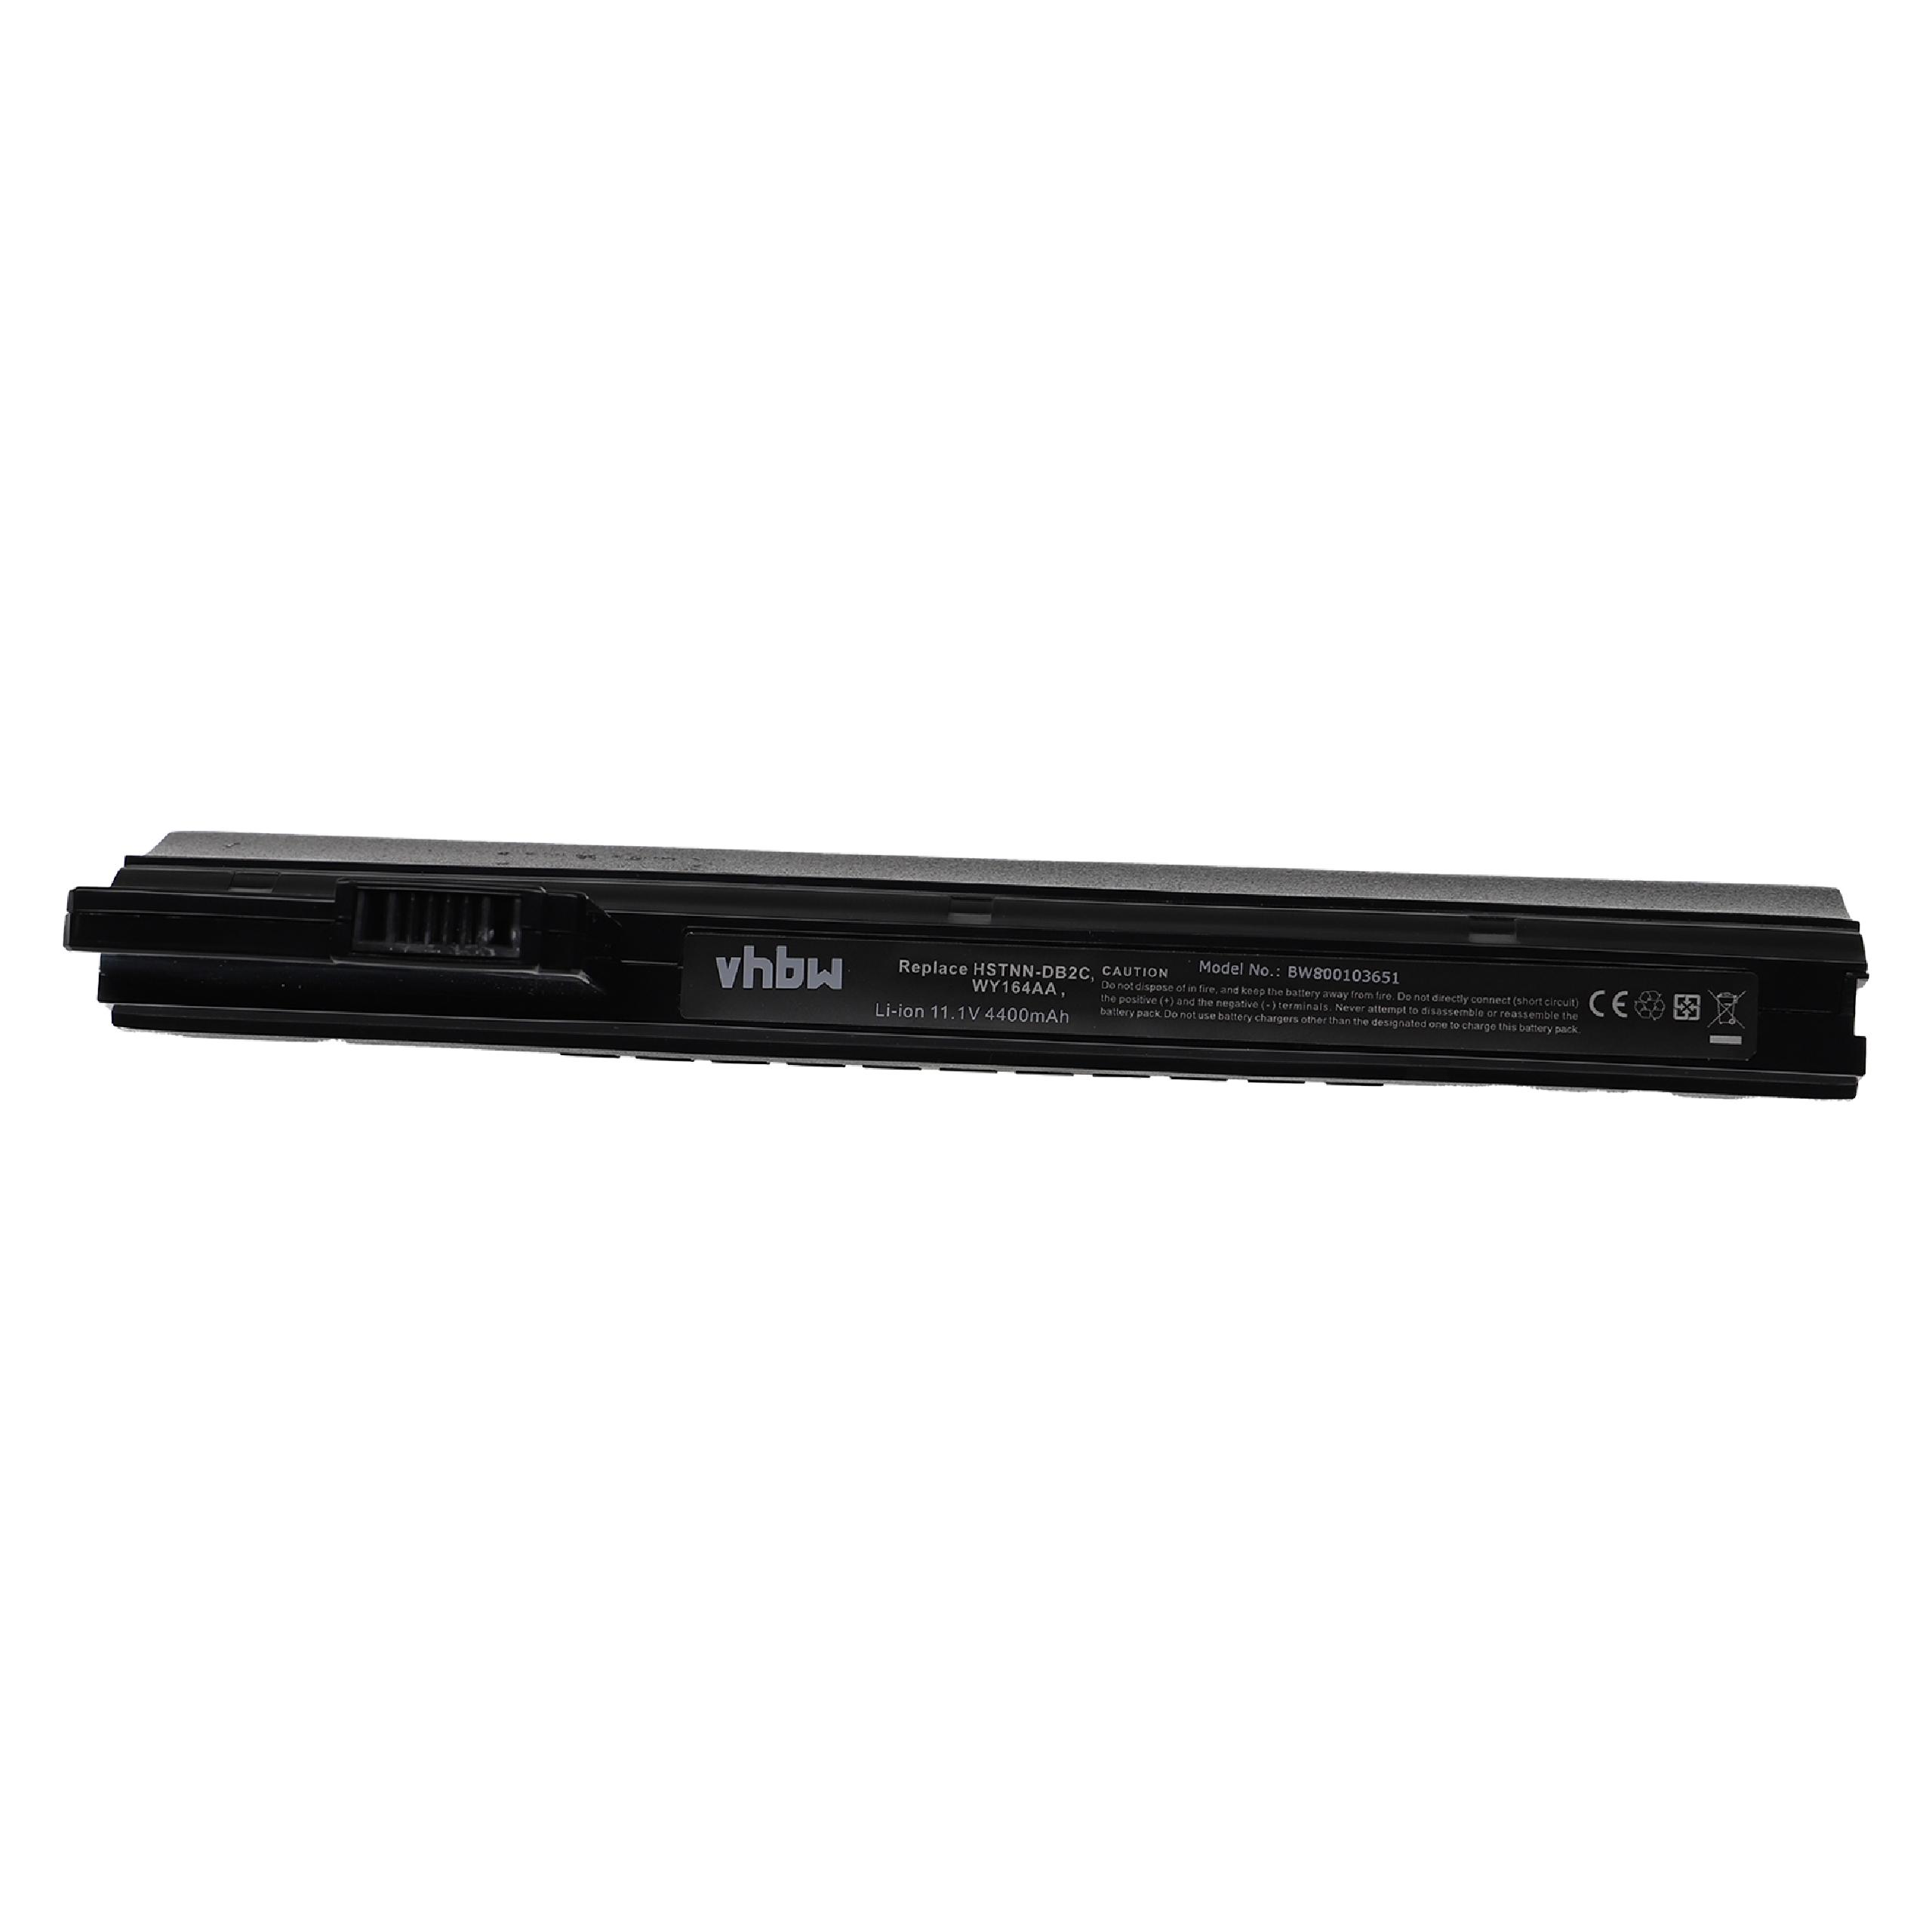 Notebook Battery Replacement for HP 614564-751, 614564-421, 614565-421 - 4400mAh 11.1V Li-Ion, black